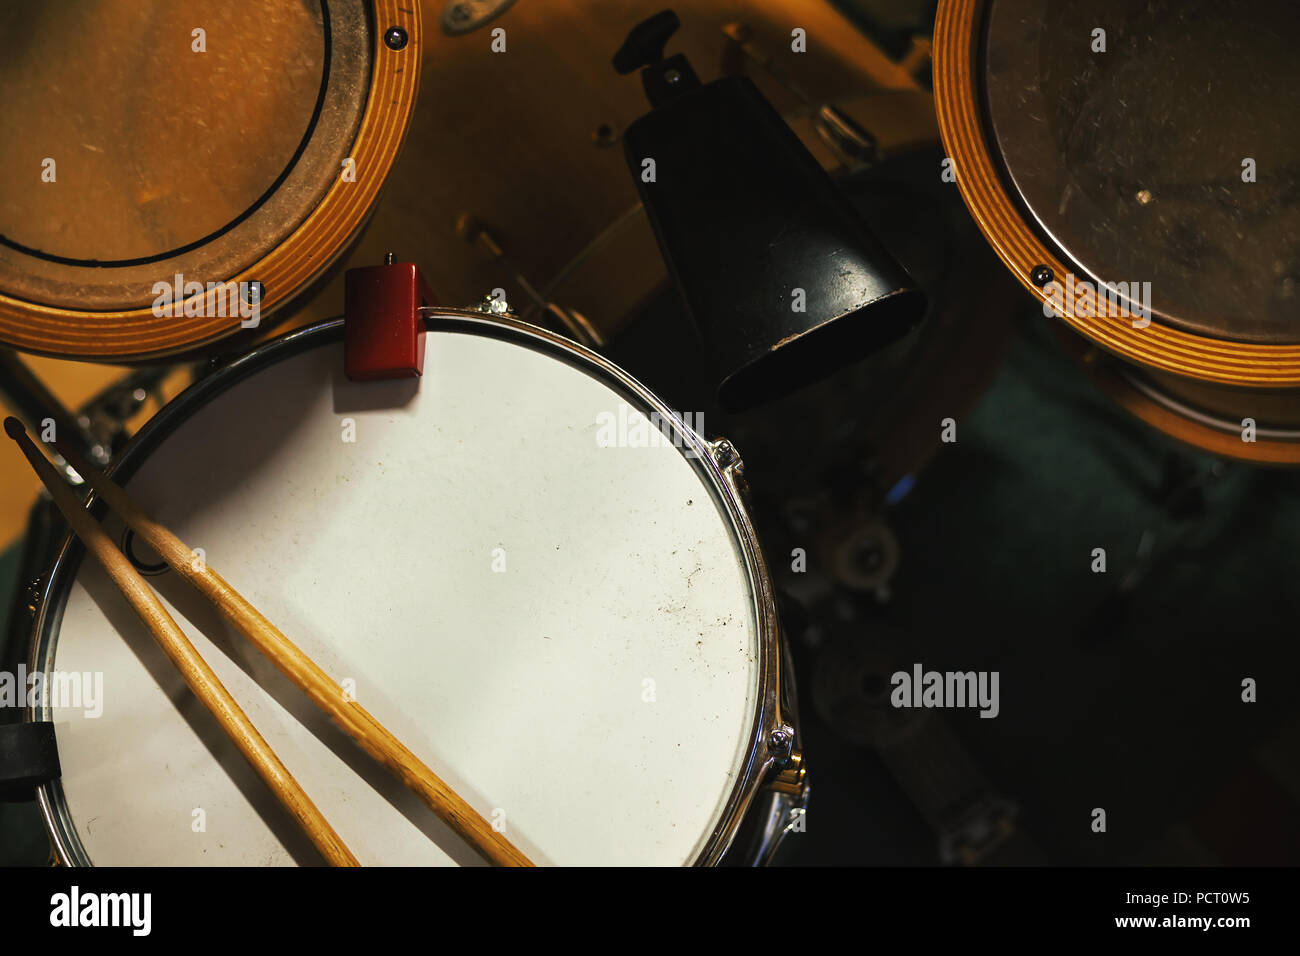 Part of a drum kit, details of toms and snare. Stock Photo